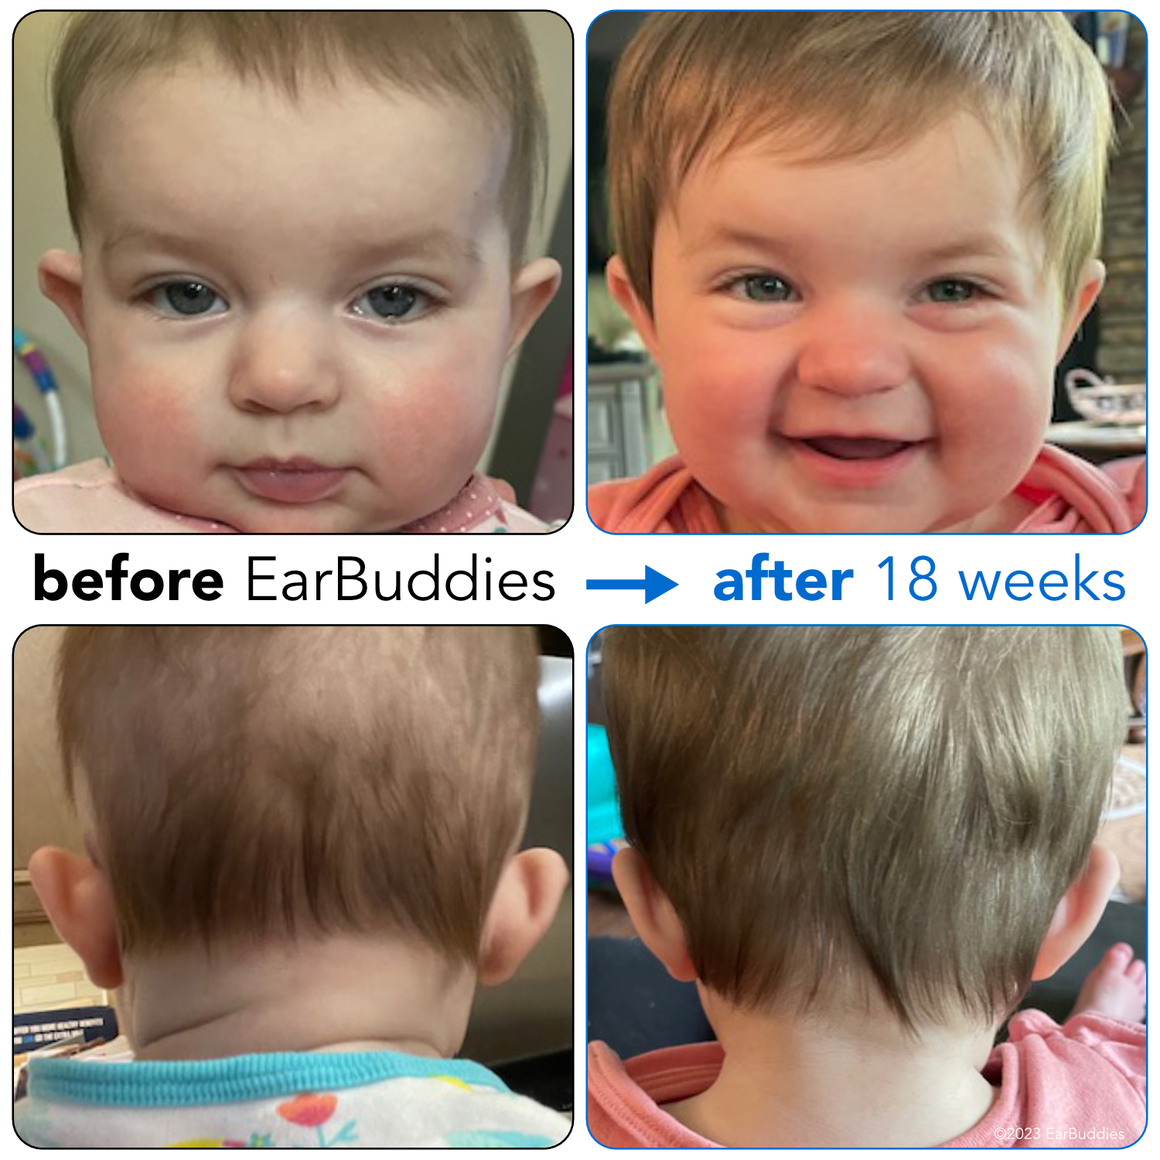 baby elfin ears, sharing my expereince using earbuddies(TM) on my baby